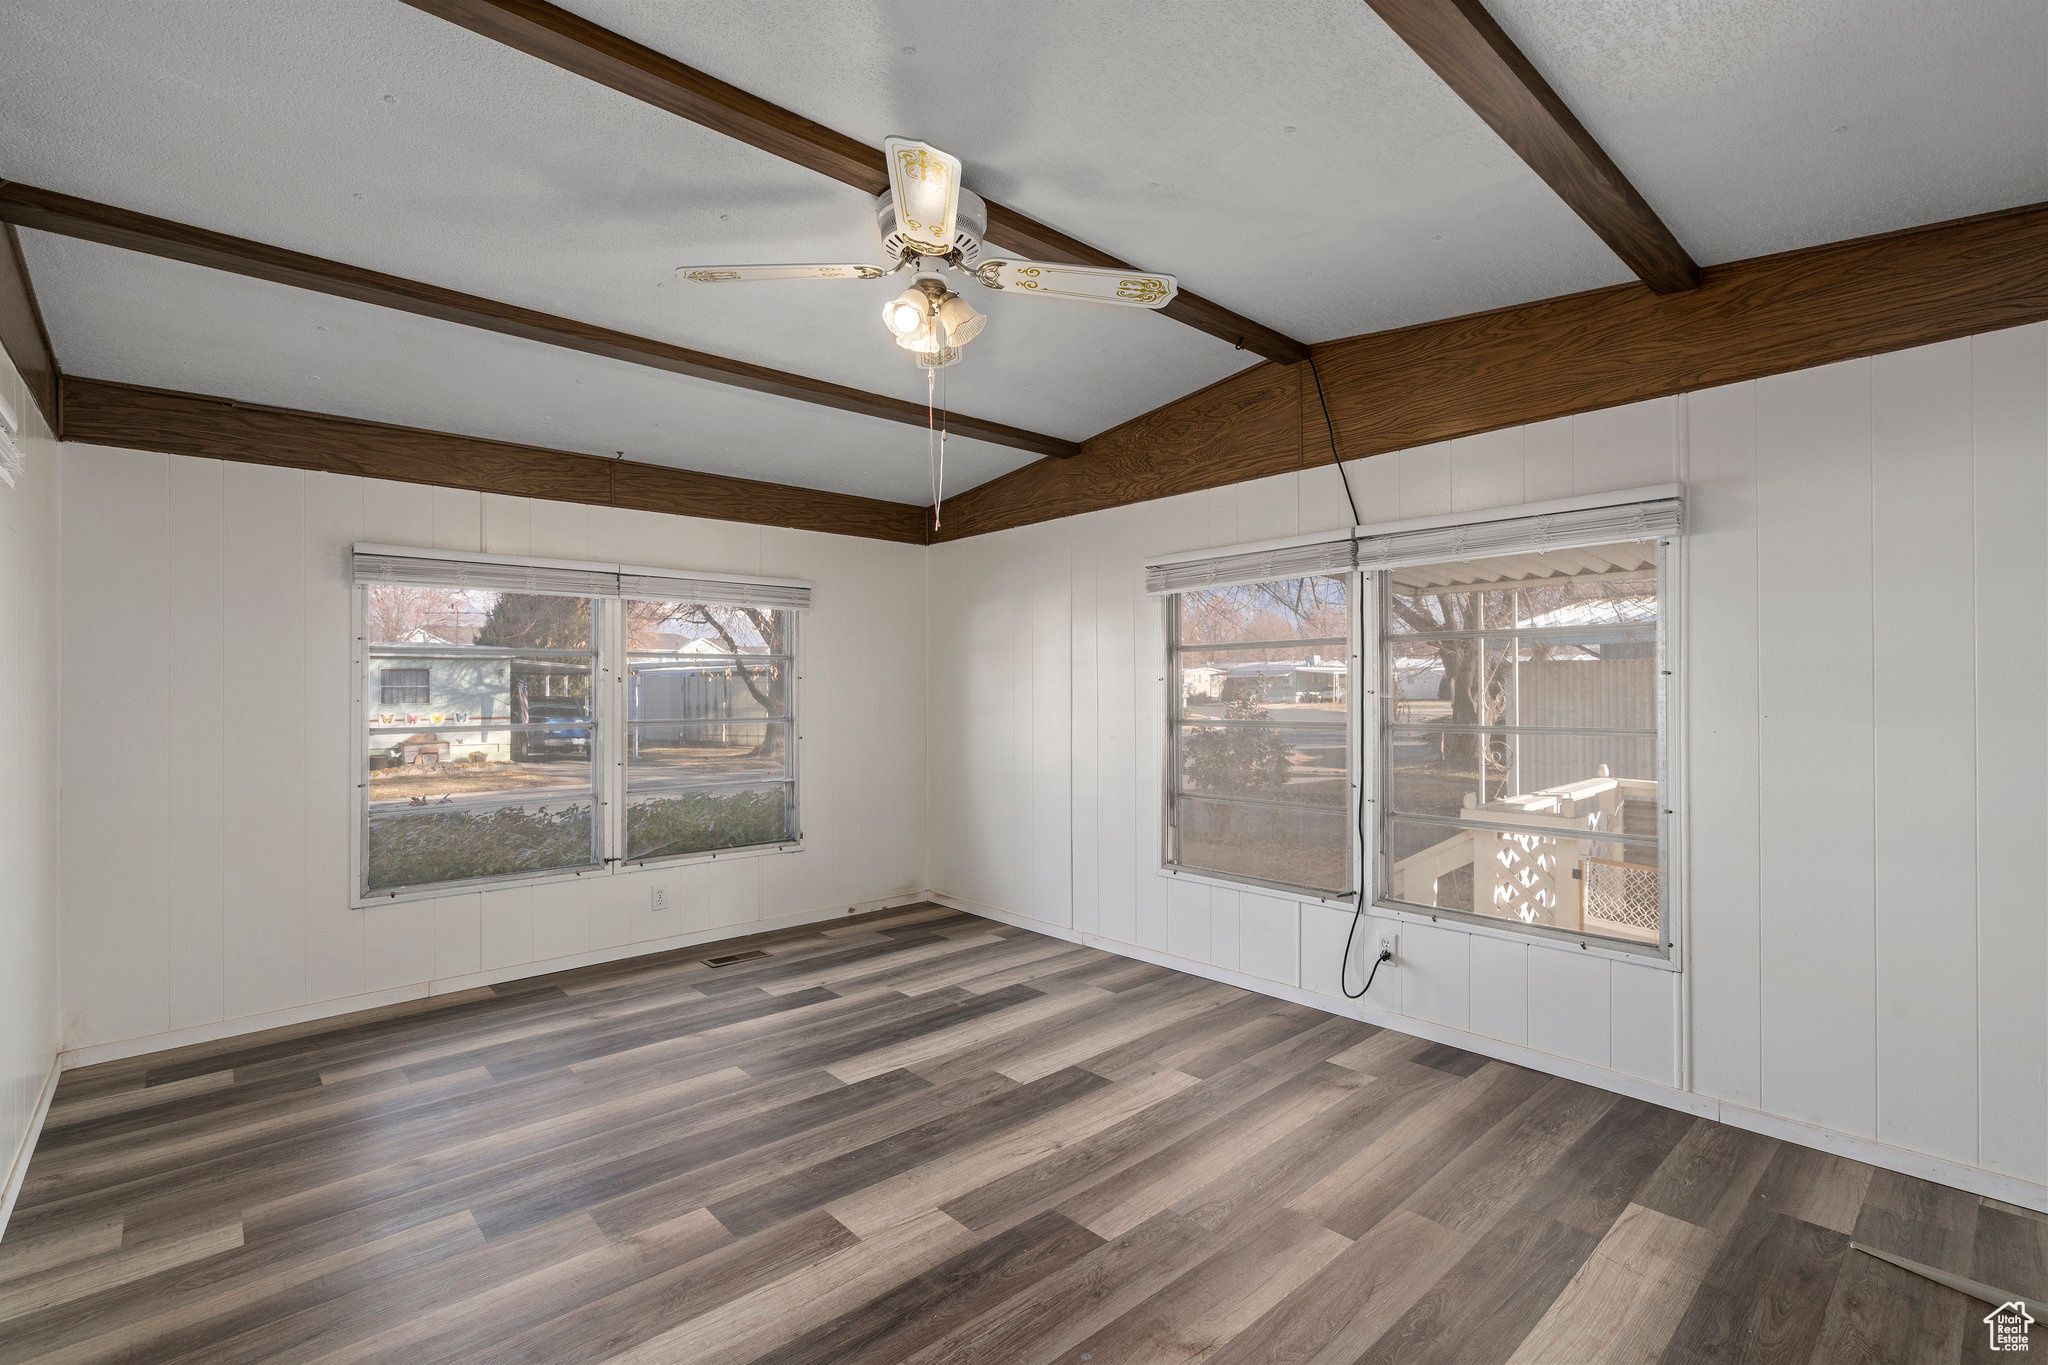 Empty room with dark hardwood / wood-style floors, ceiling fan, and lofted ceiling with beams